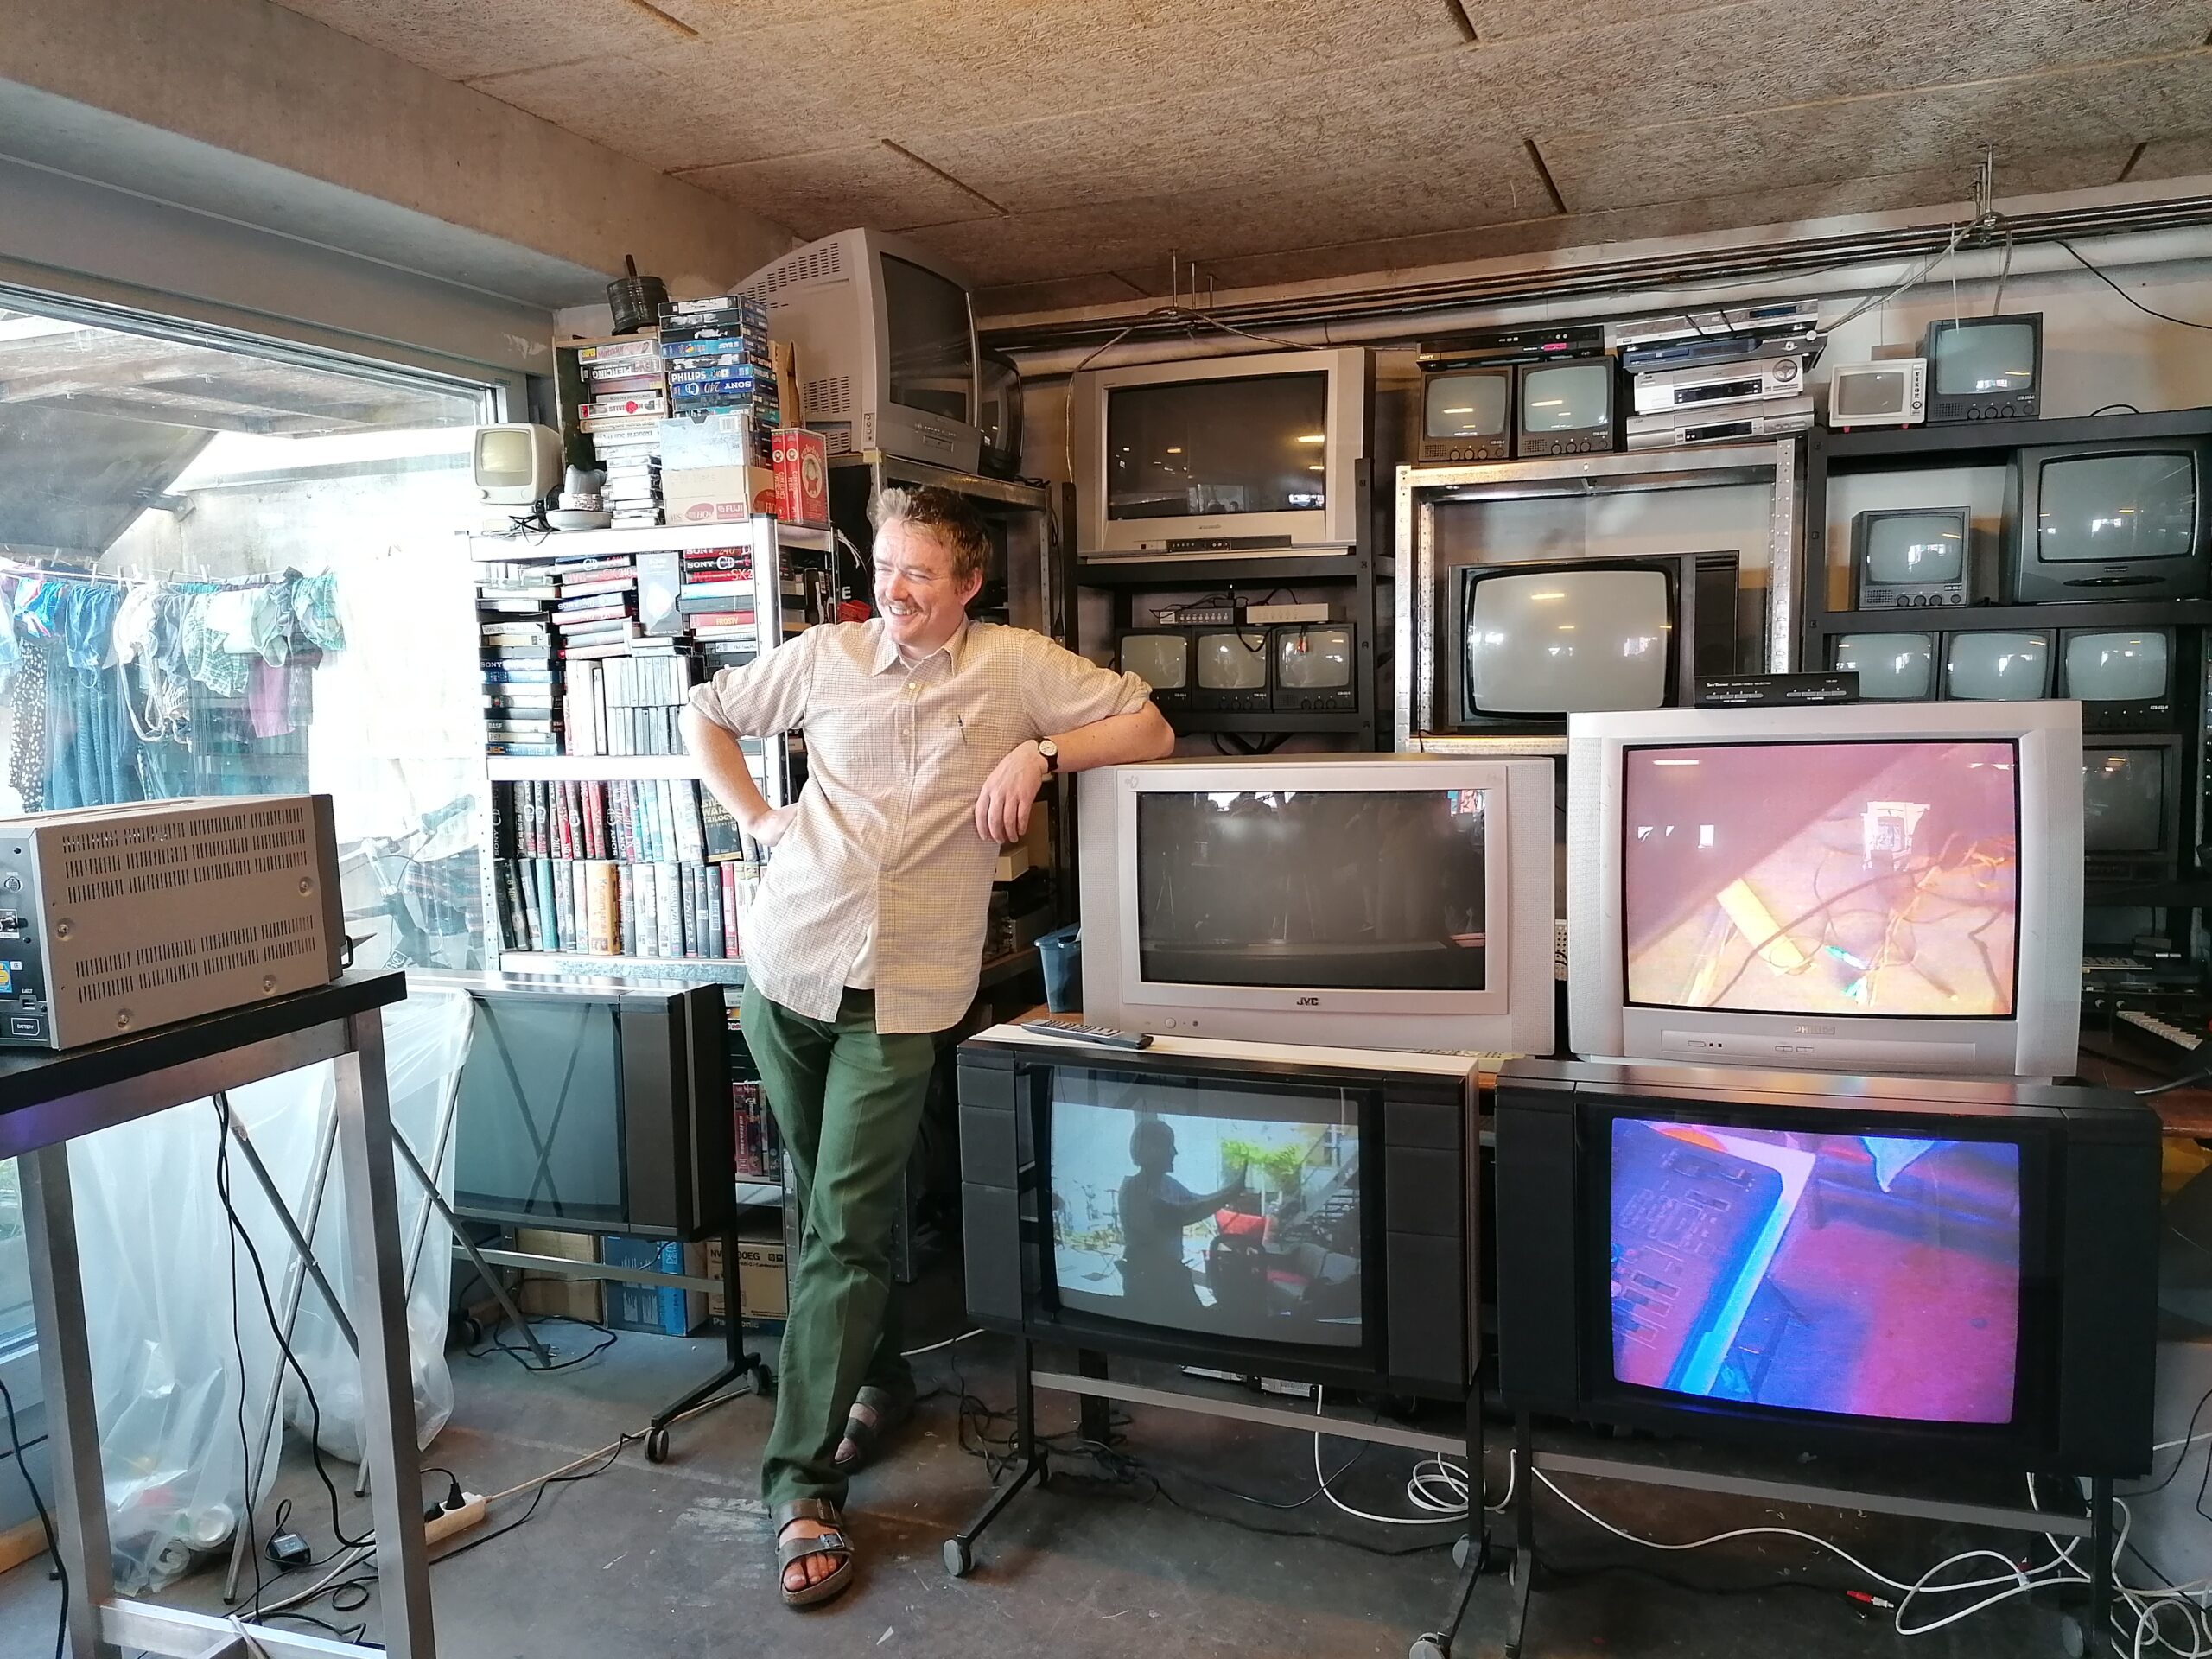 Liam standing next to a bunch of tvs